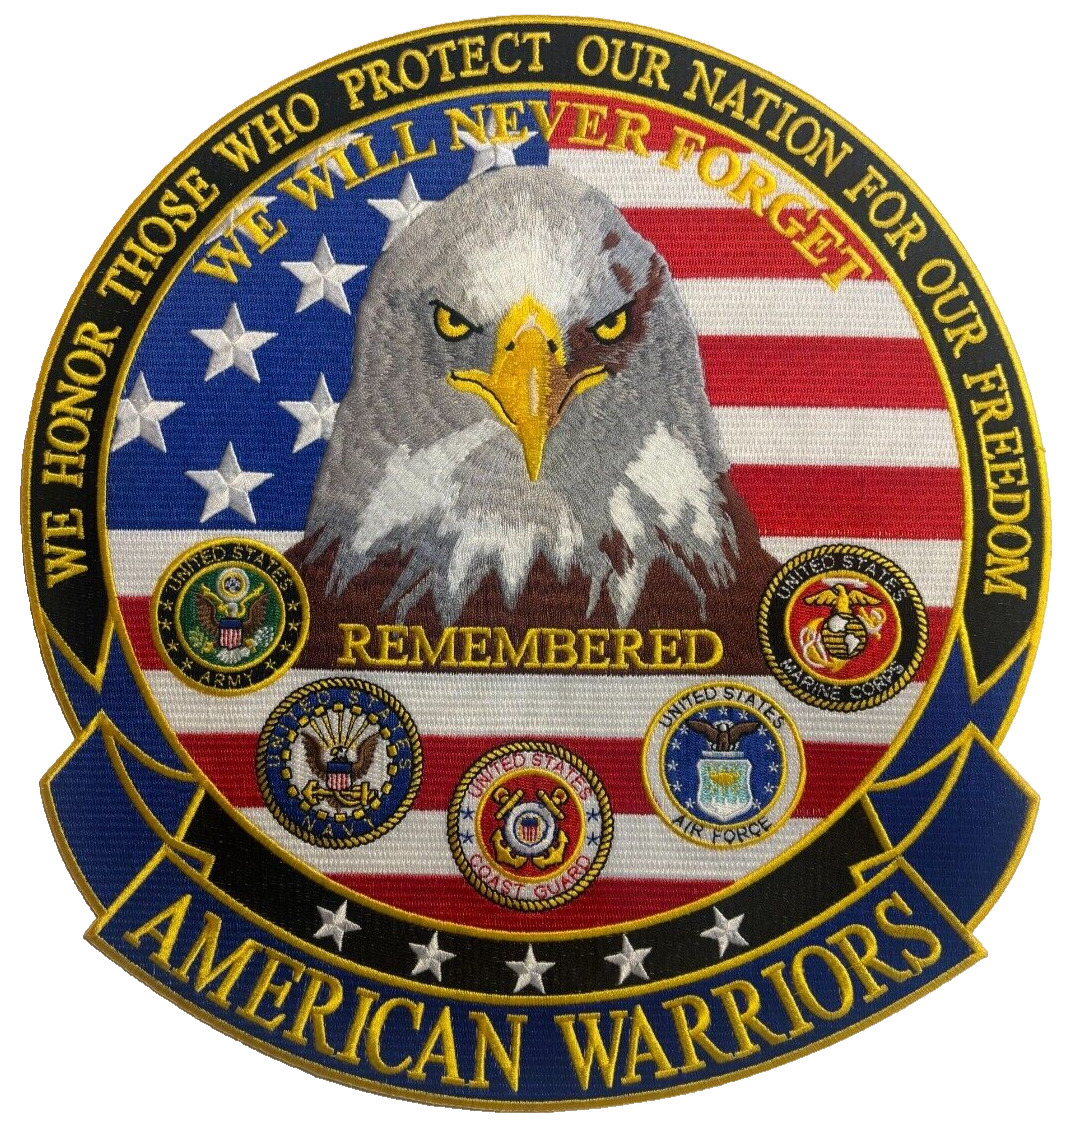 AMERICAN WARRIORS WE HONOR THOSE WHO PROTECT LARGE BIKER PATCH IRON ON 12X11 INC